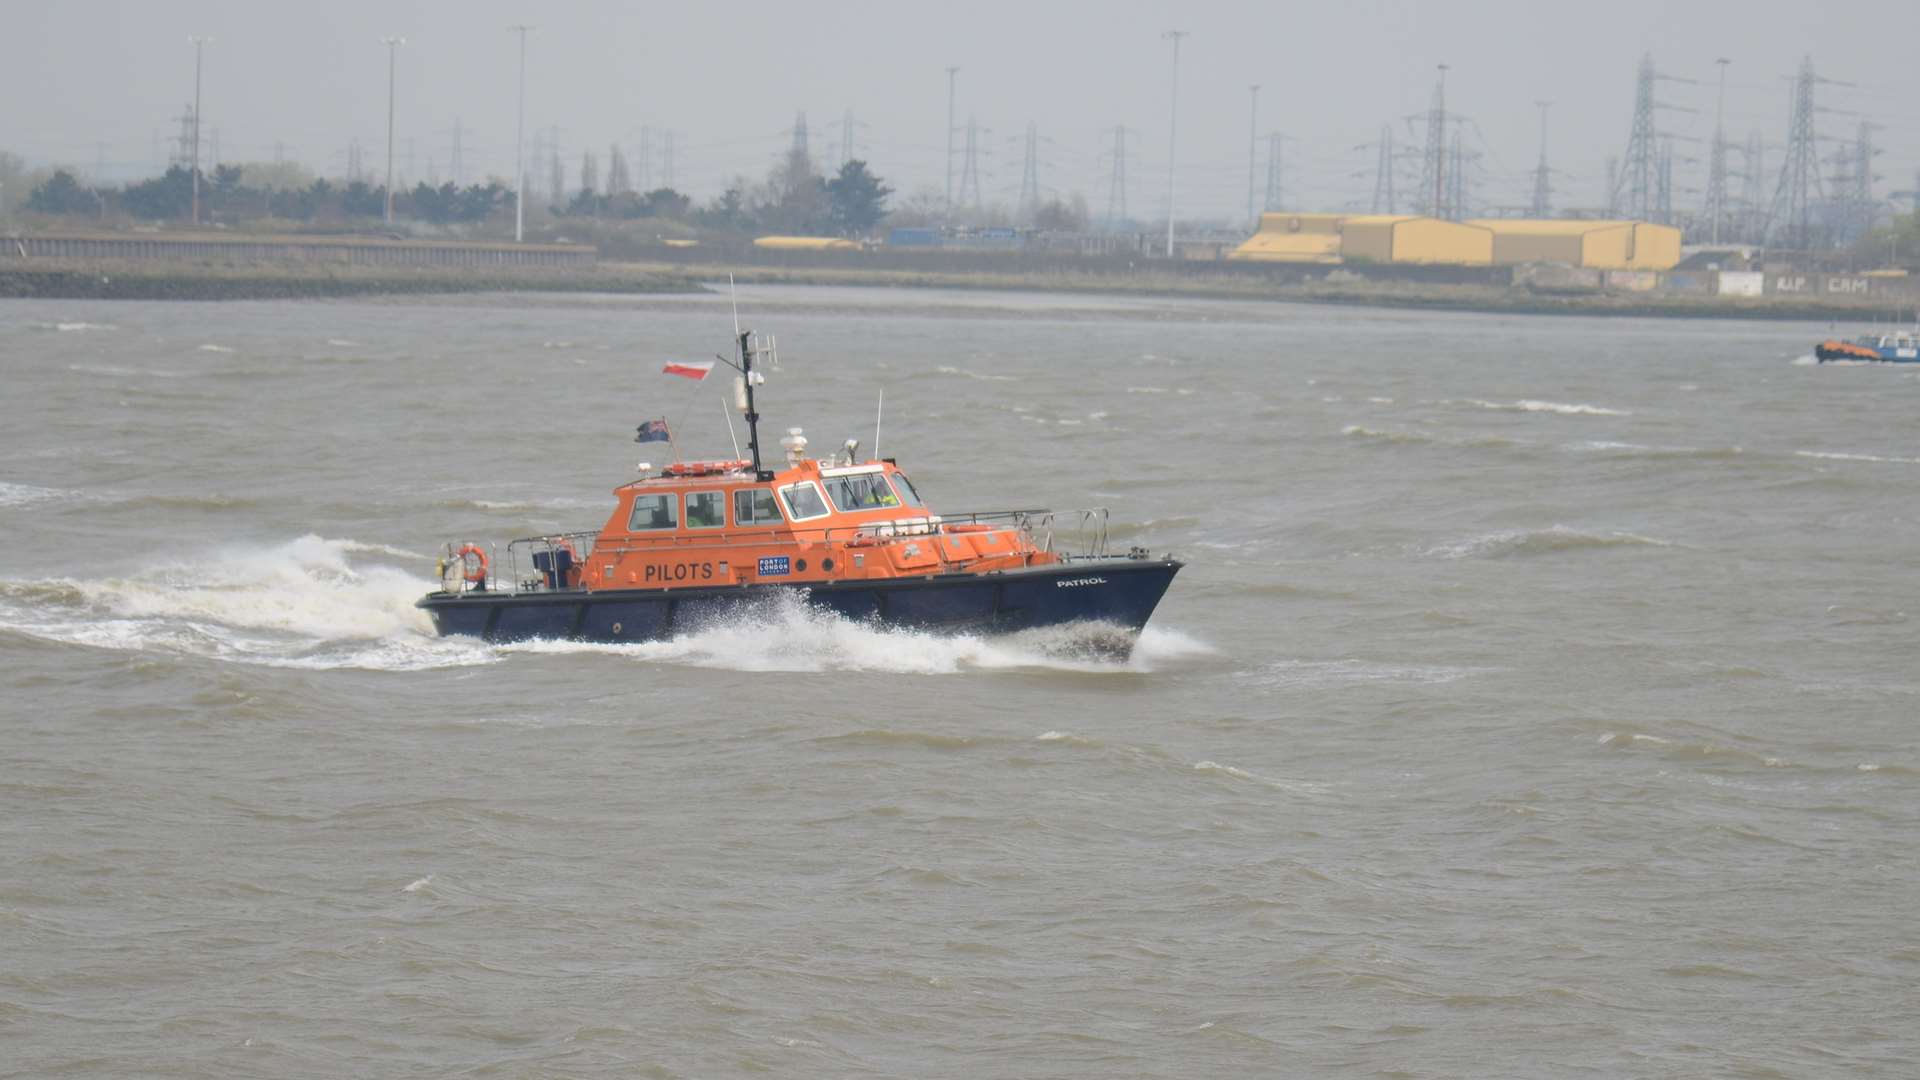 The Port of London Authority Pilot's boat working off the Royal Terrace Pier